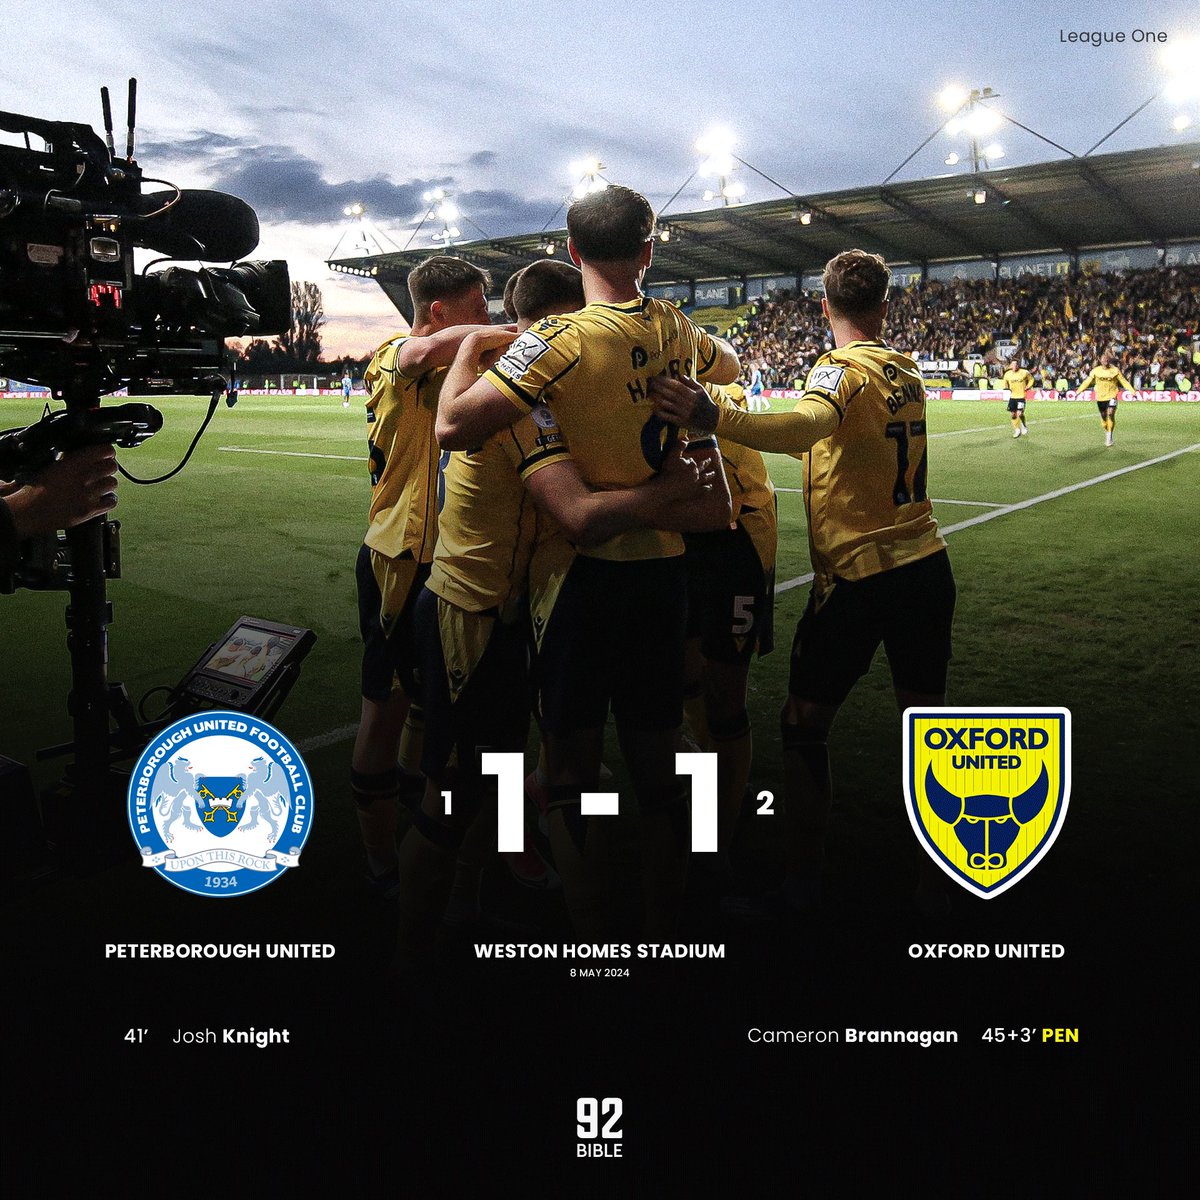 OXFORD ARE GOING TO WEMBLEY!! 💛💙 Unbelievable! Oxford United have drawn 1-1 away at Peterborough United to secure a place in the League One playoff final… Des Buckingham’s side will face Bolton Wanderers in the final 👀 Thoughts on the game…?! 👇